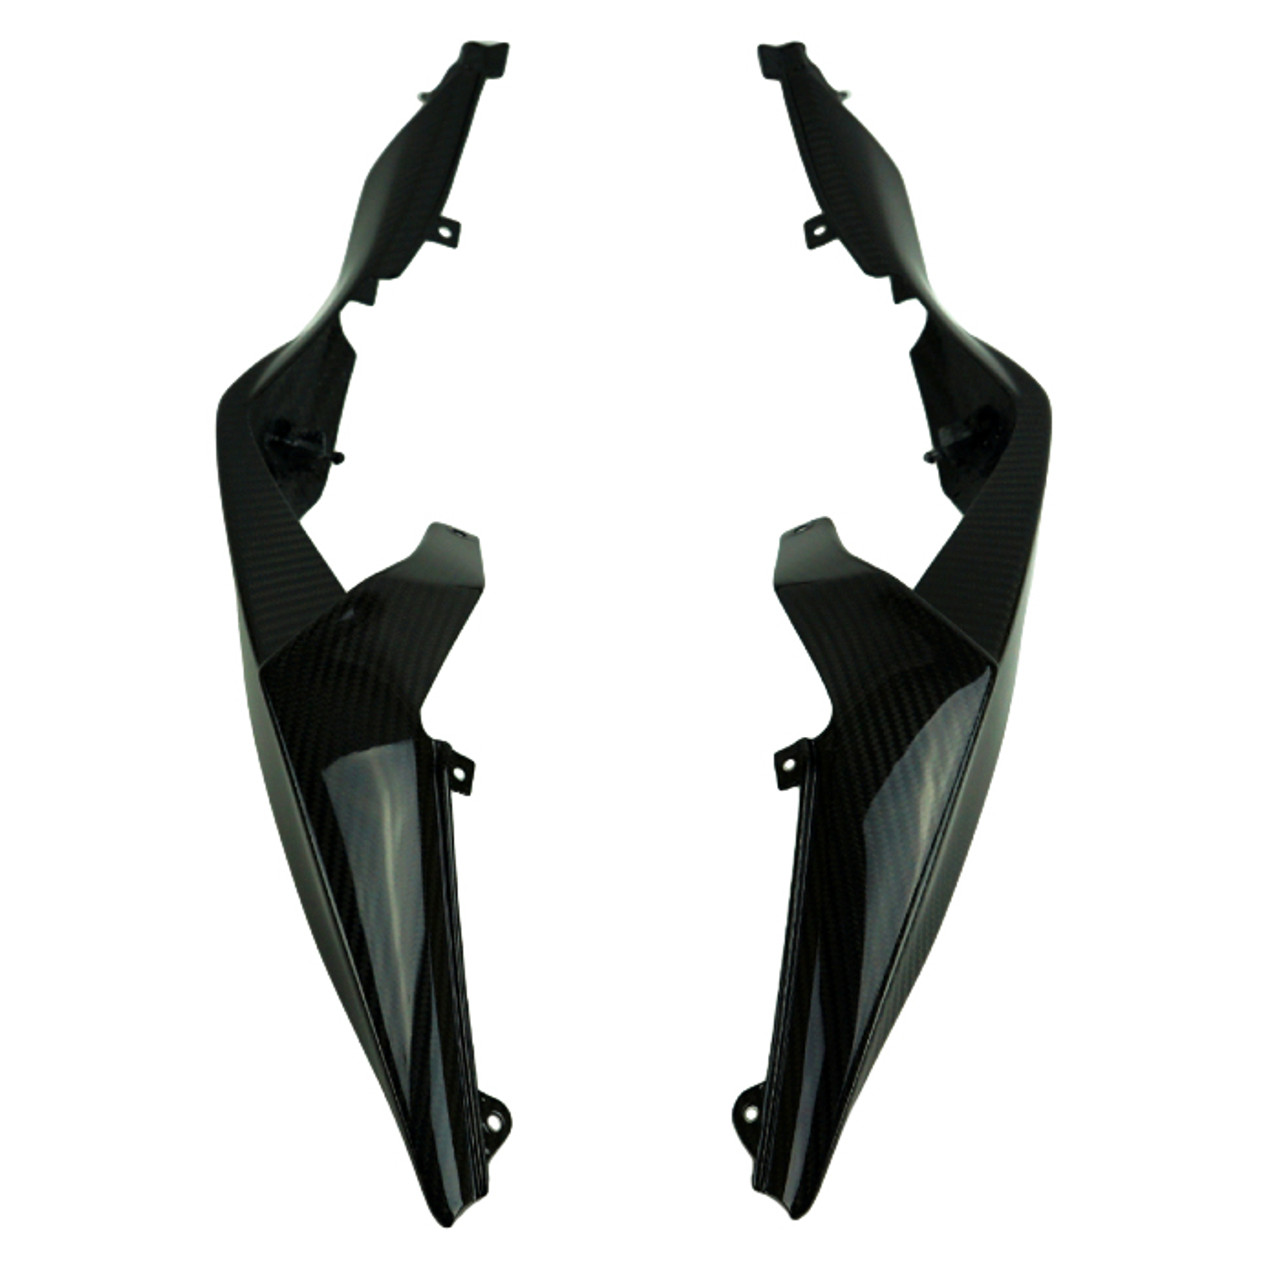 Tail Fairing Sides in Glossy Twill Weave Carbon Fiber for Kawasaki ZX6R 2019+